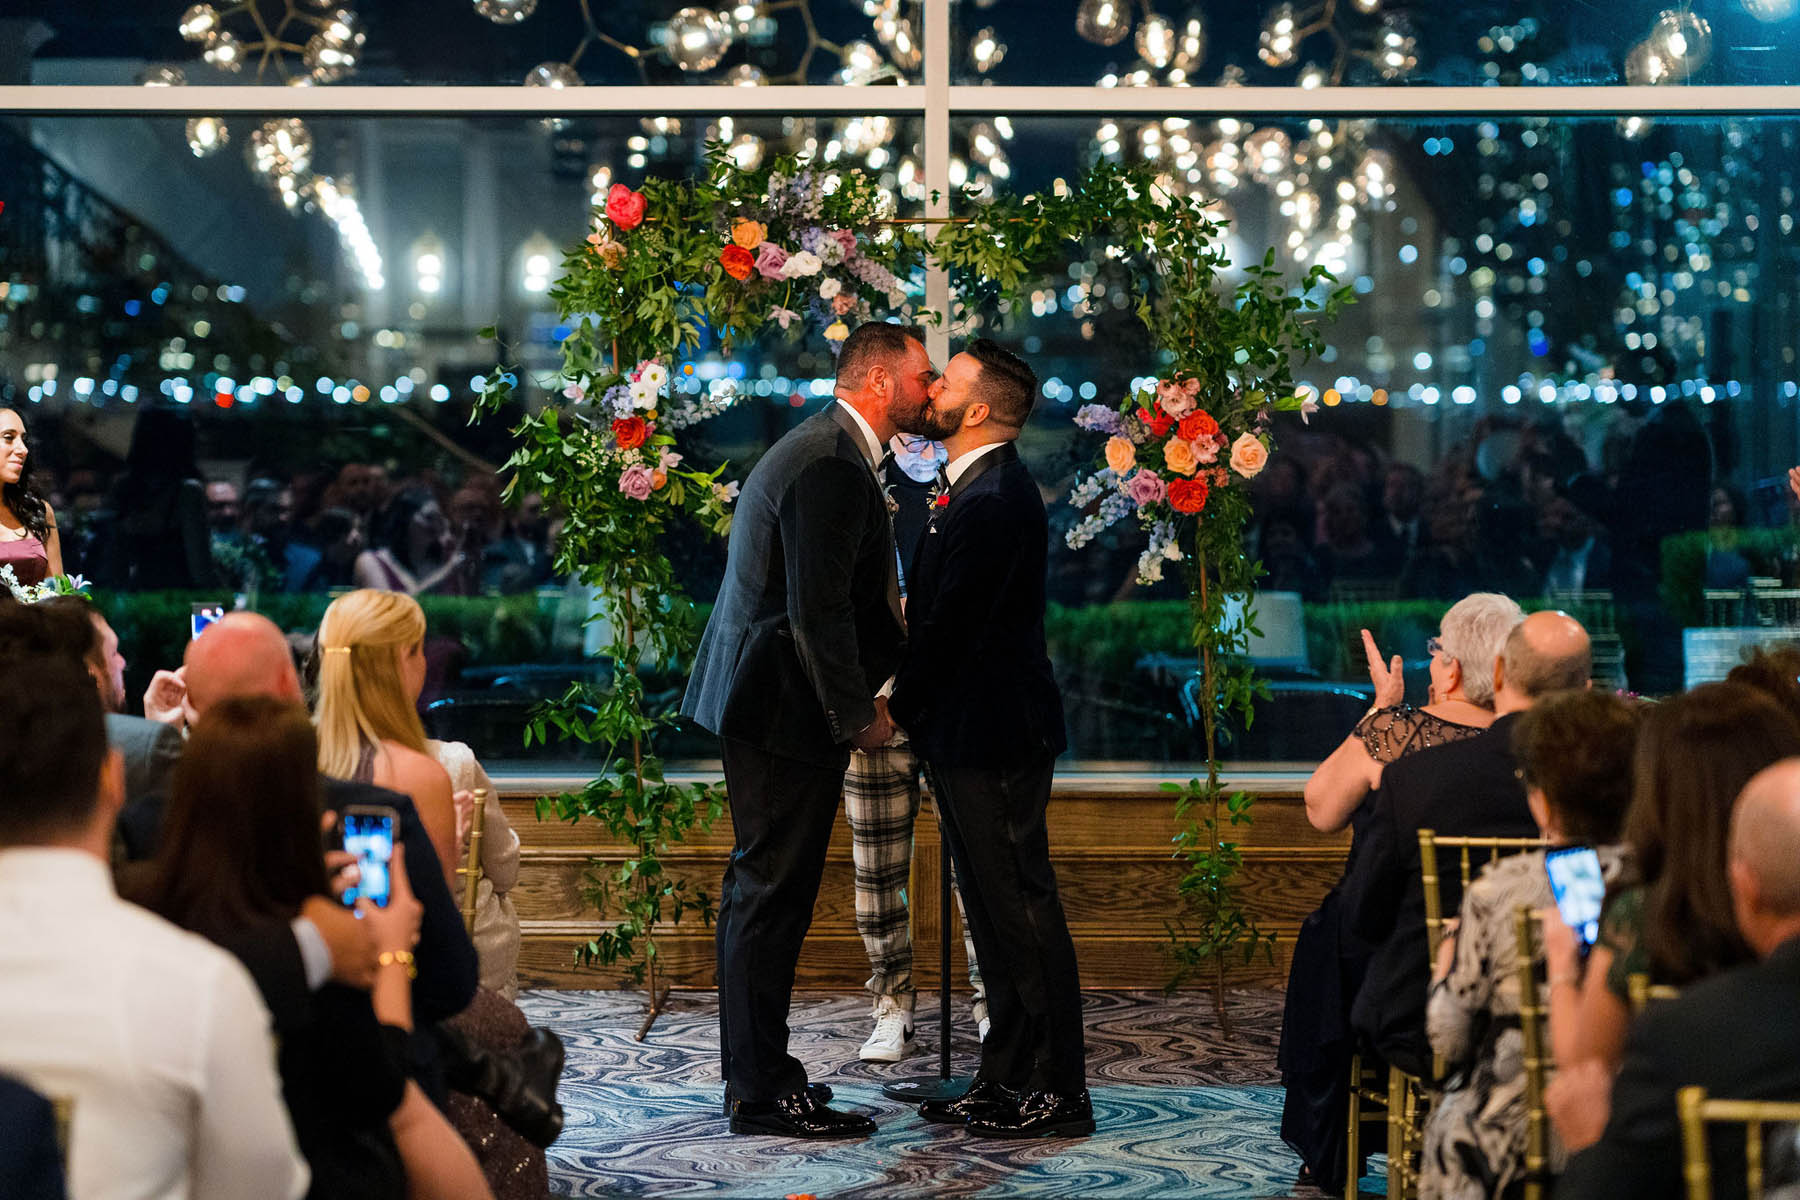 Two grooms stand in front of a set of large windows and a floral arbor. They share a kiss.